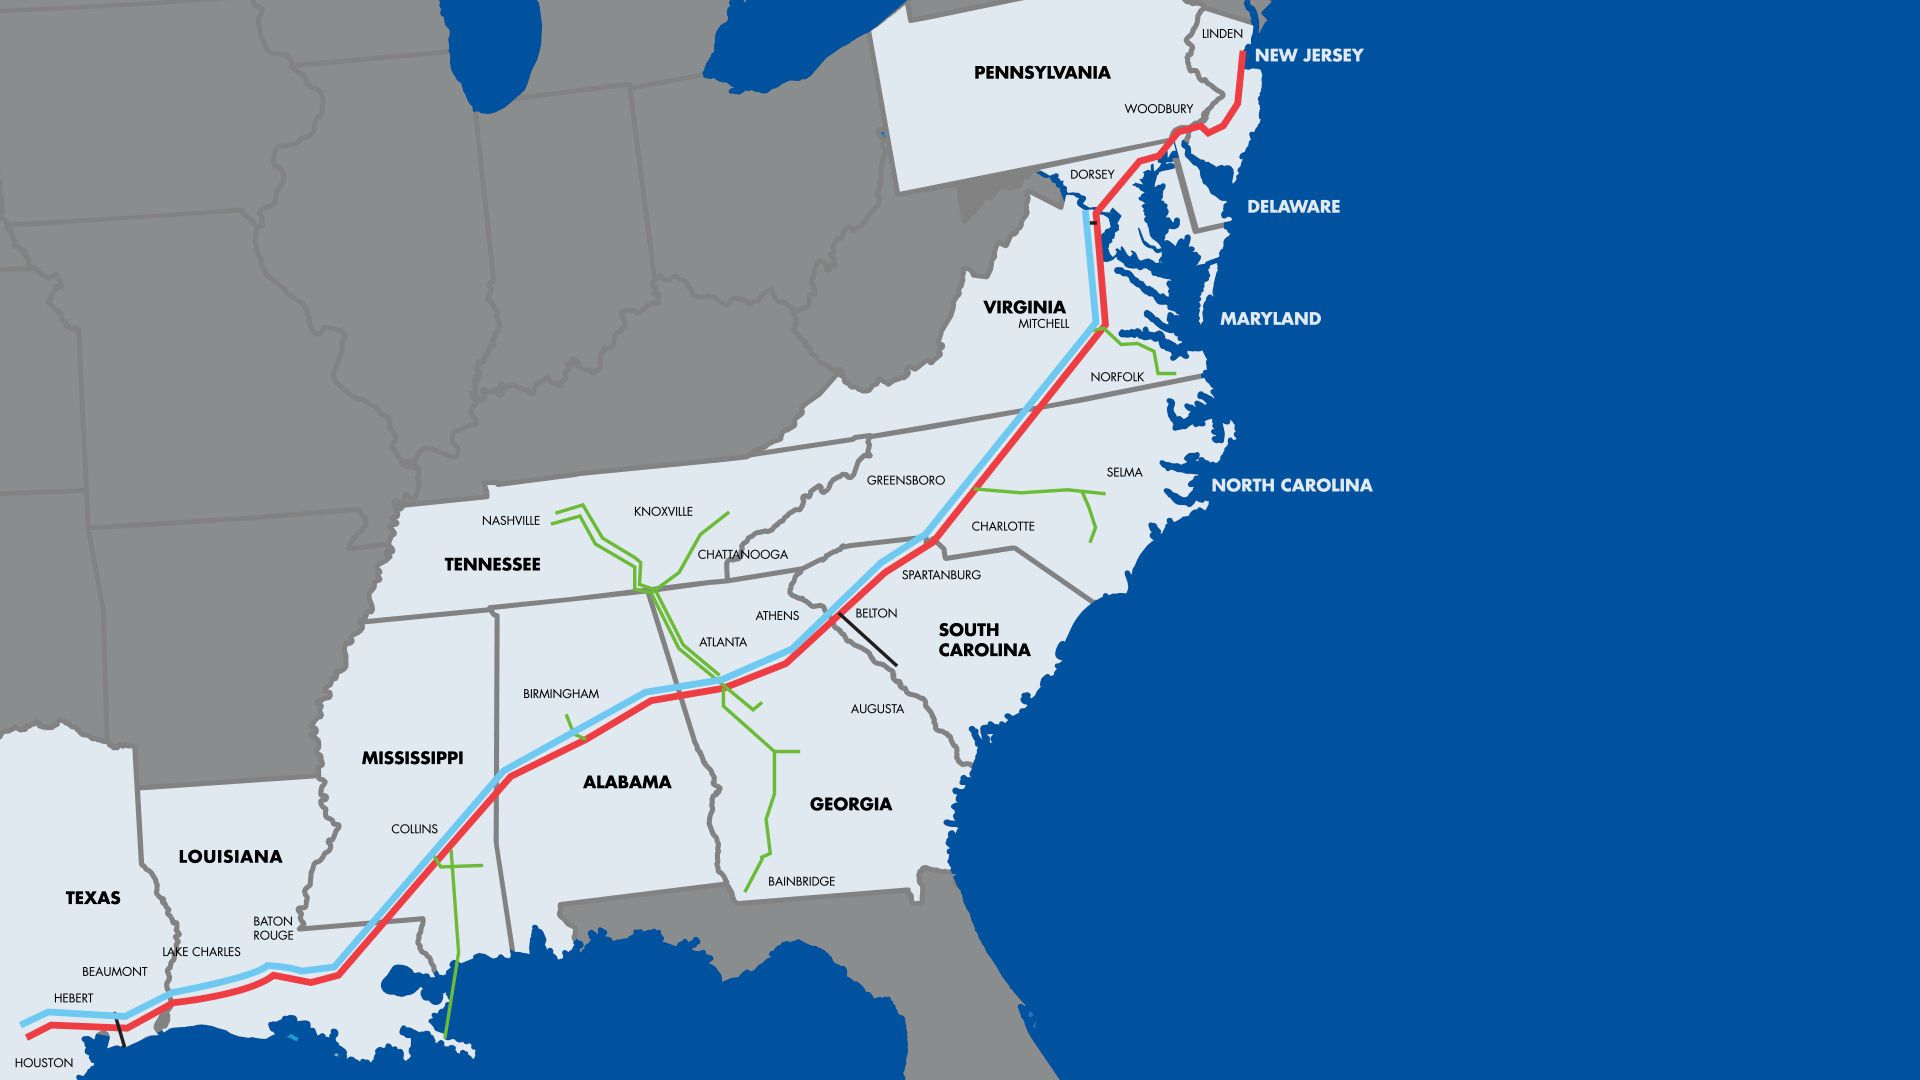 Map showing the states covered by the Colonial Pipeline system.